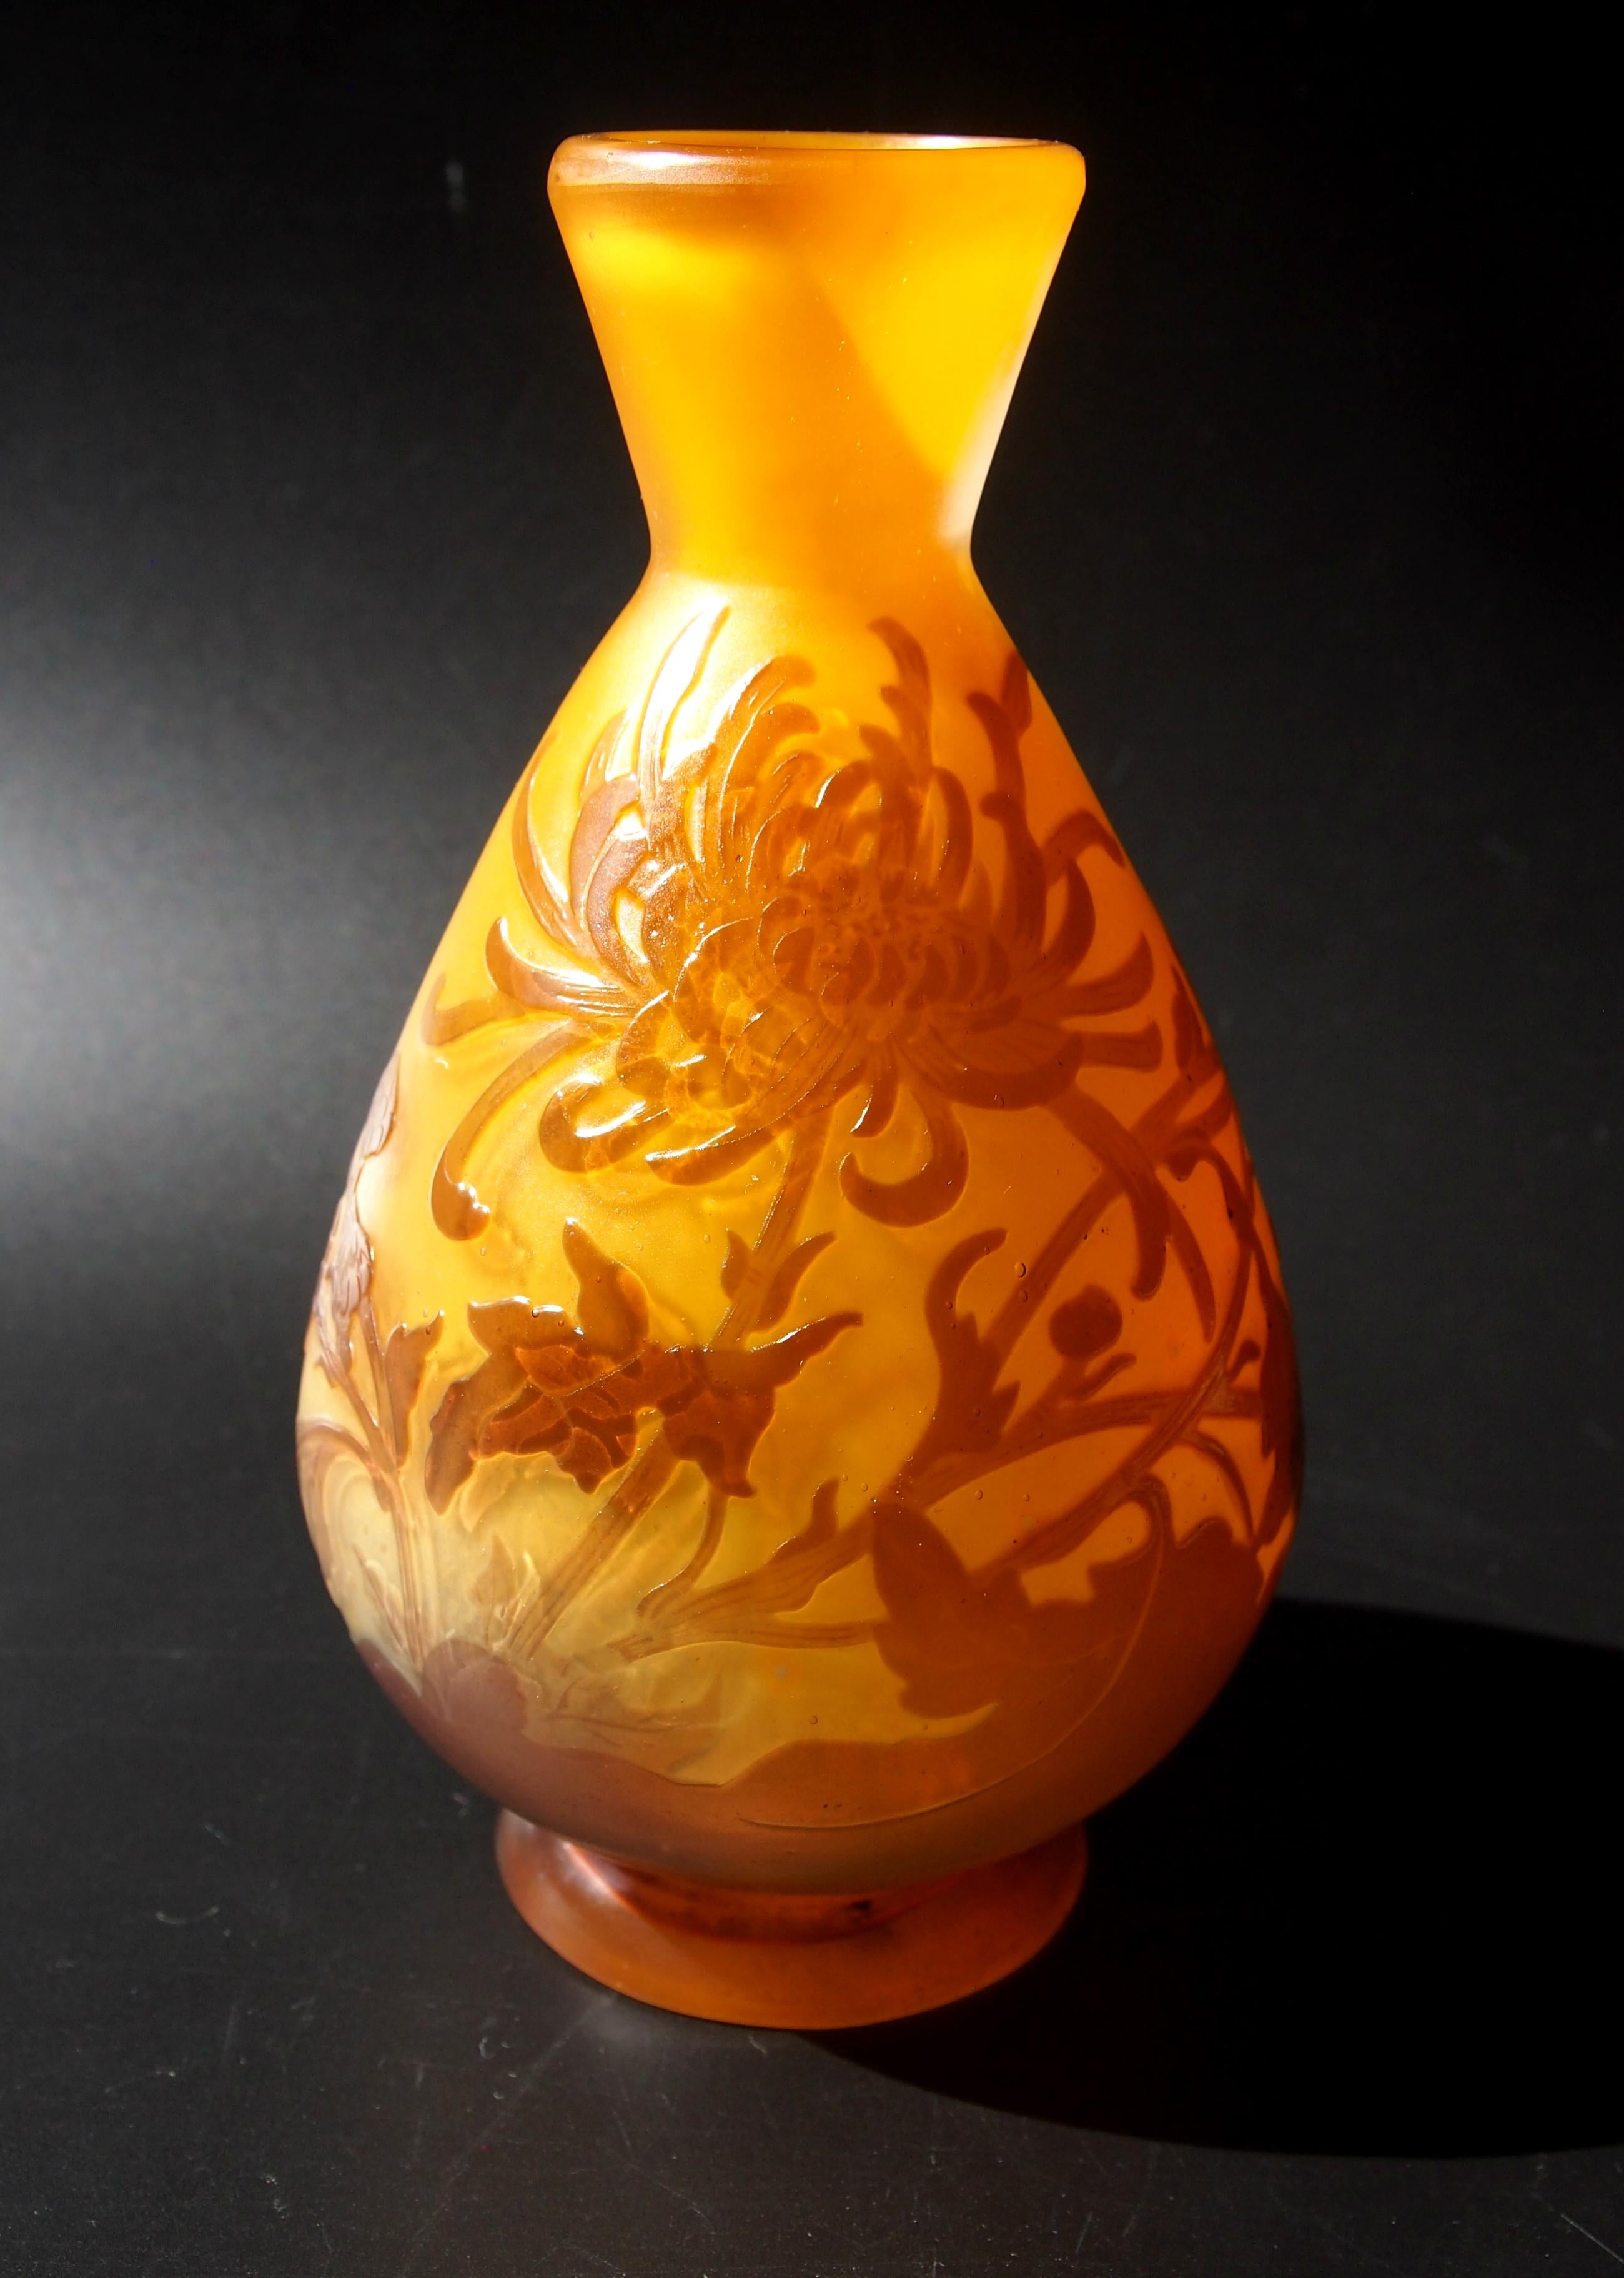 Superb Emile Galle cameo vase in a classic shape. Purple over orange (making the purple look brown) - depicting stunning flowering Spider Mums (spiky Chrysanthemums). It is signed in cameo (image 4). 

Emile Galle was probably the greatest glass